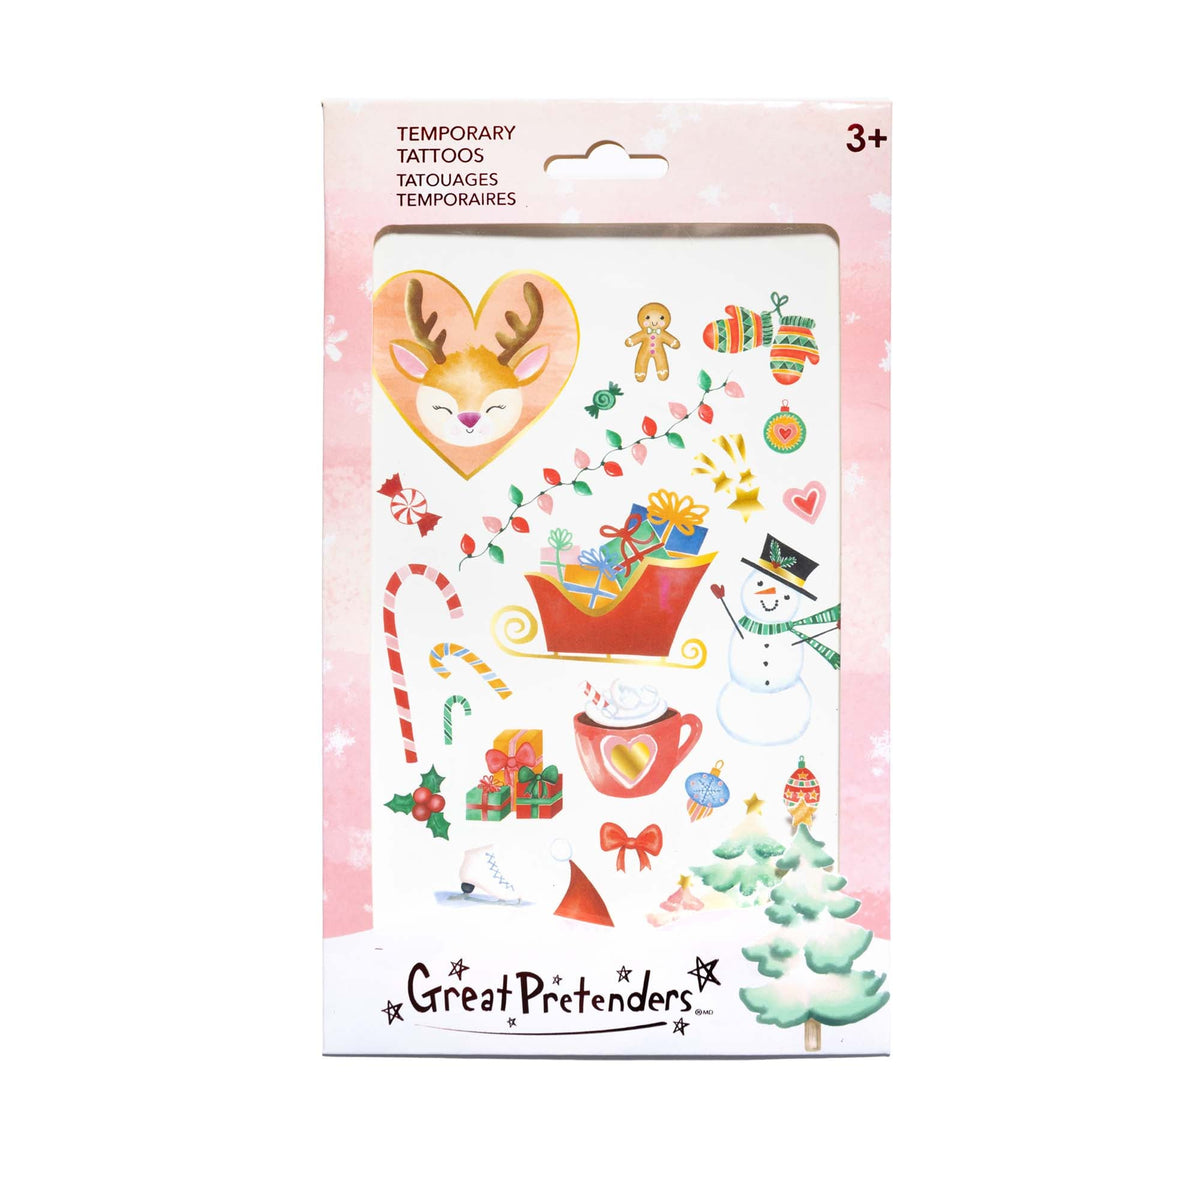 Great Pretenders Christmas Holiday Temporary Tattoos, 1 Count 771877974649